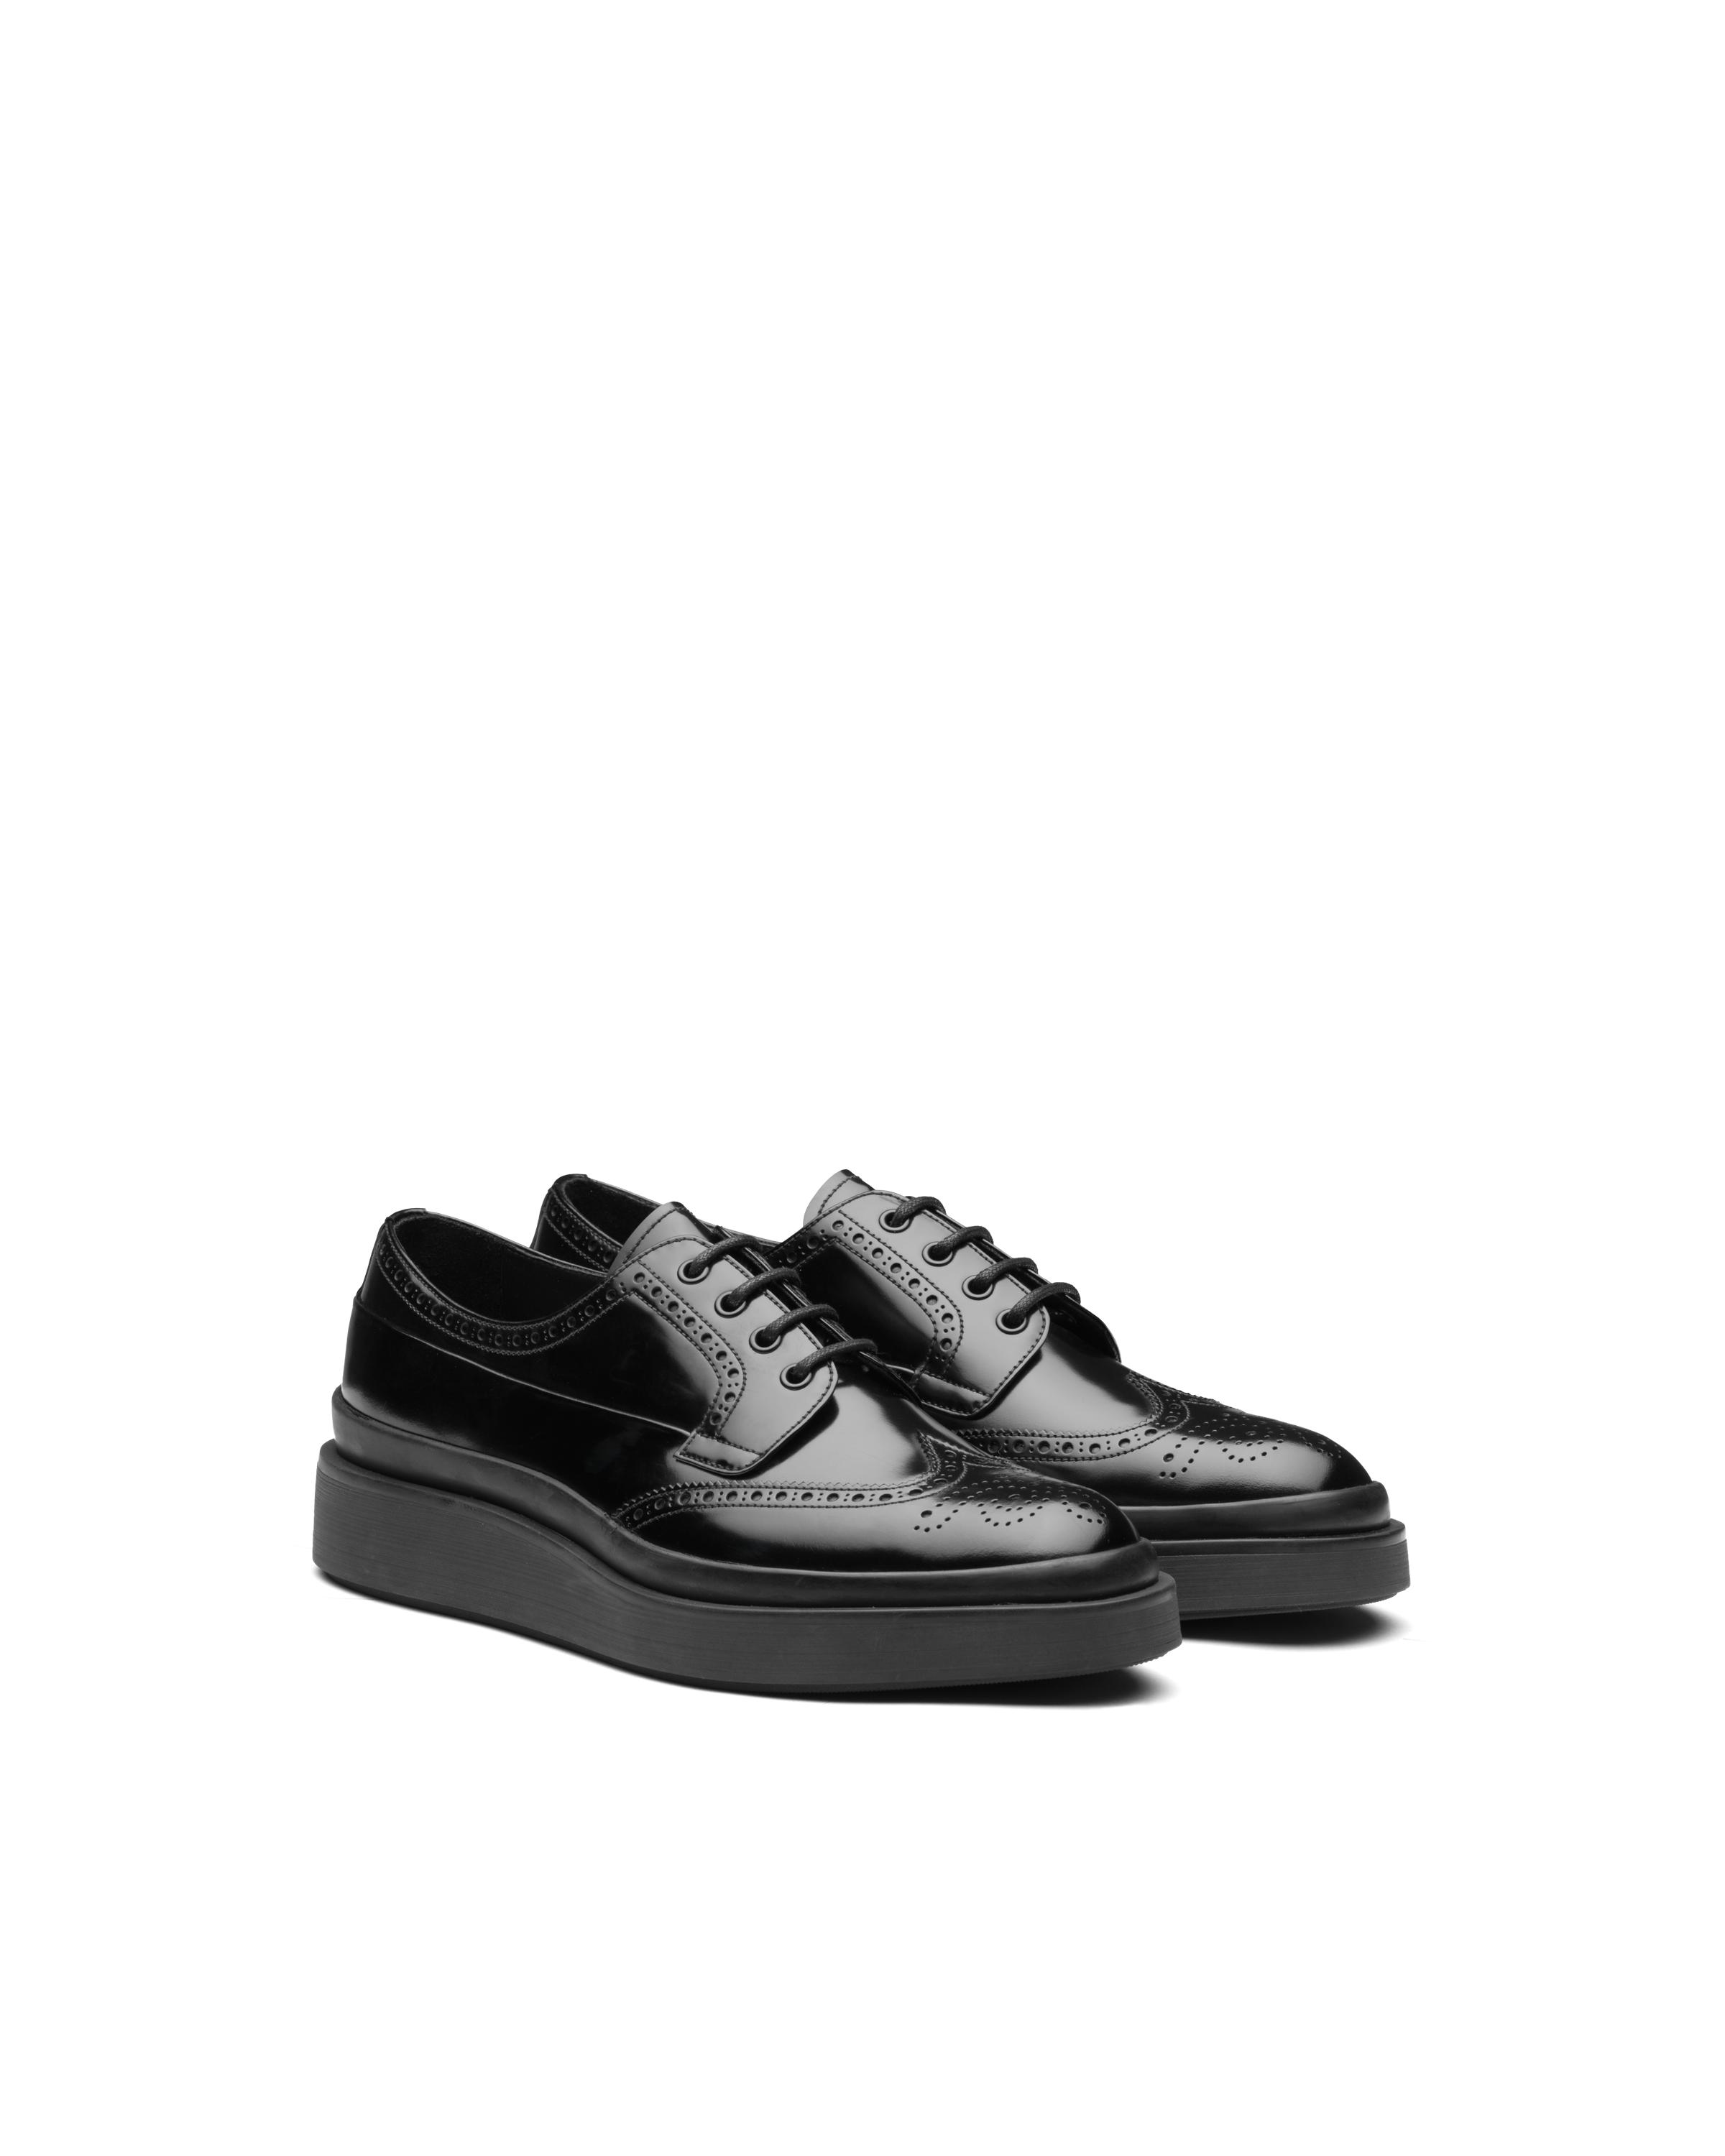 Prada Brushed Leather Derby Shoes in Black for Men - Lyst